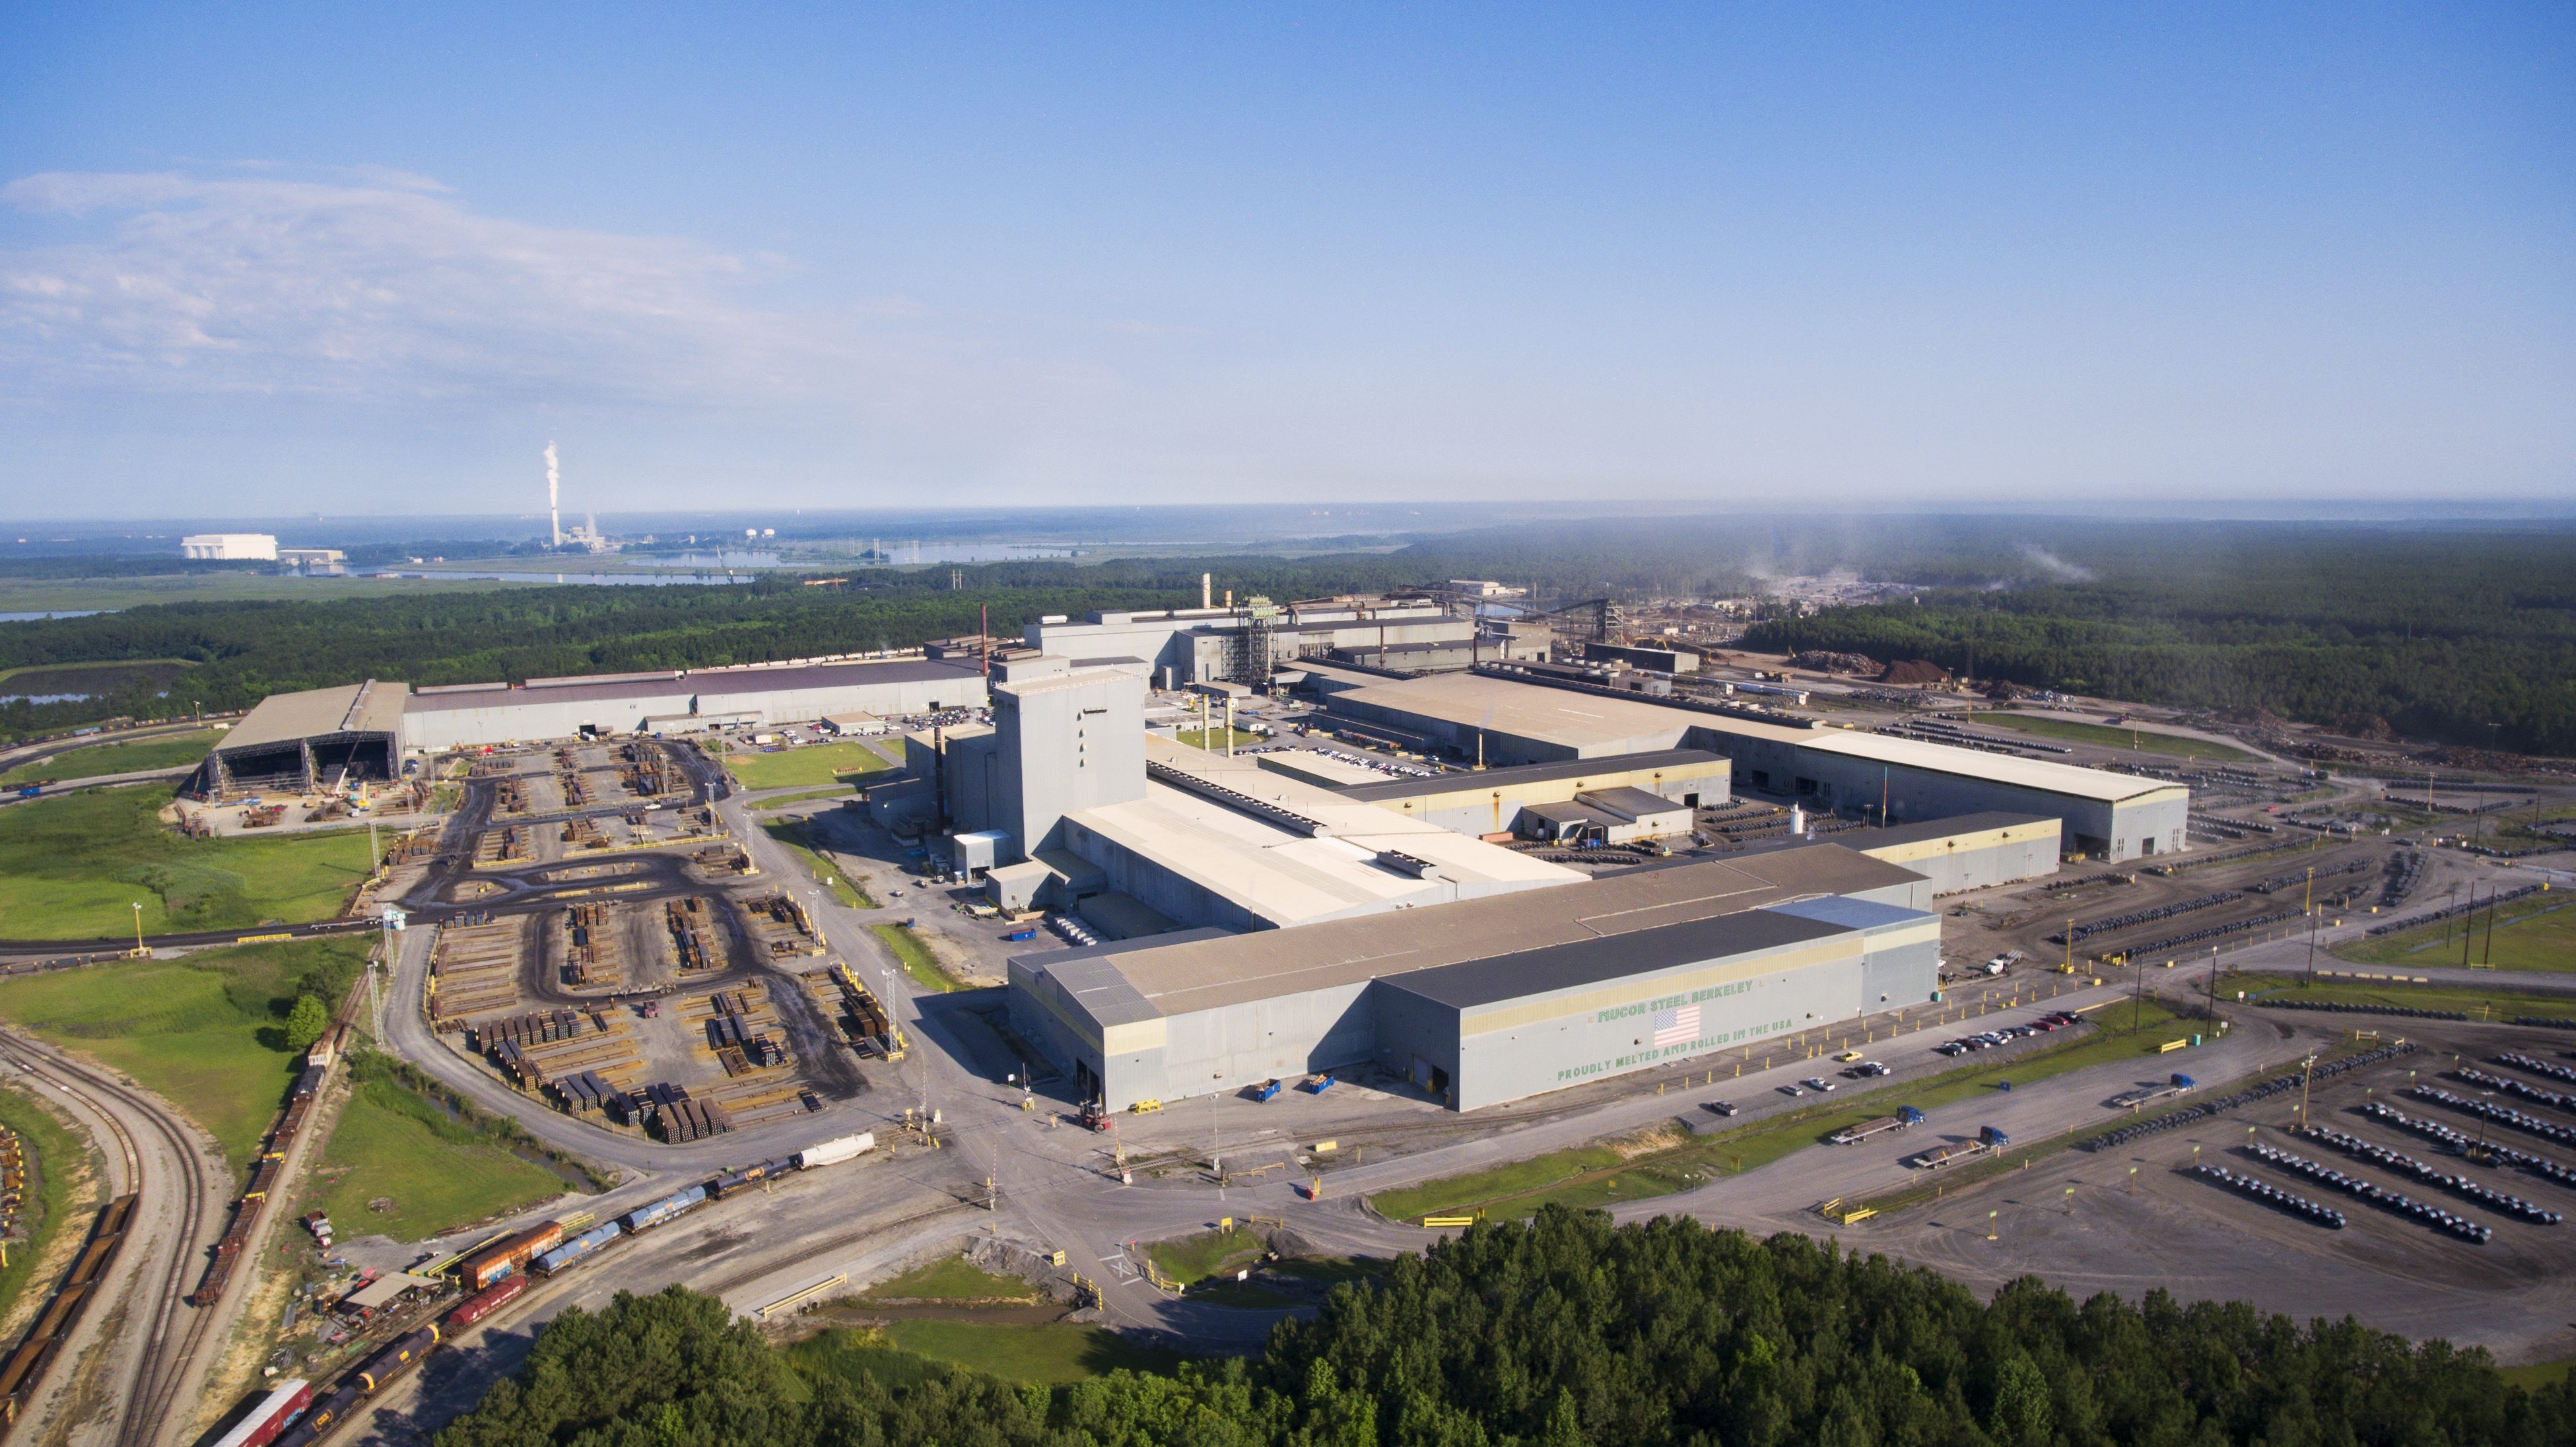 A Nucor EAF steel mill. Circular steelmaking, powered by the electric arc furnace (EAF), is the process of making steel using recycled scrap metal as the primary feedstock (instead of raw materials extracted from the earth) by using electricity to melt and recycle it into new steel with no loss of quality.